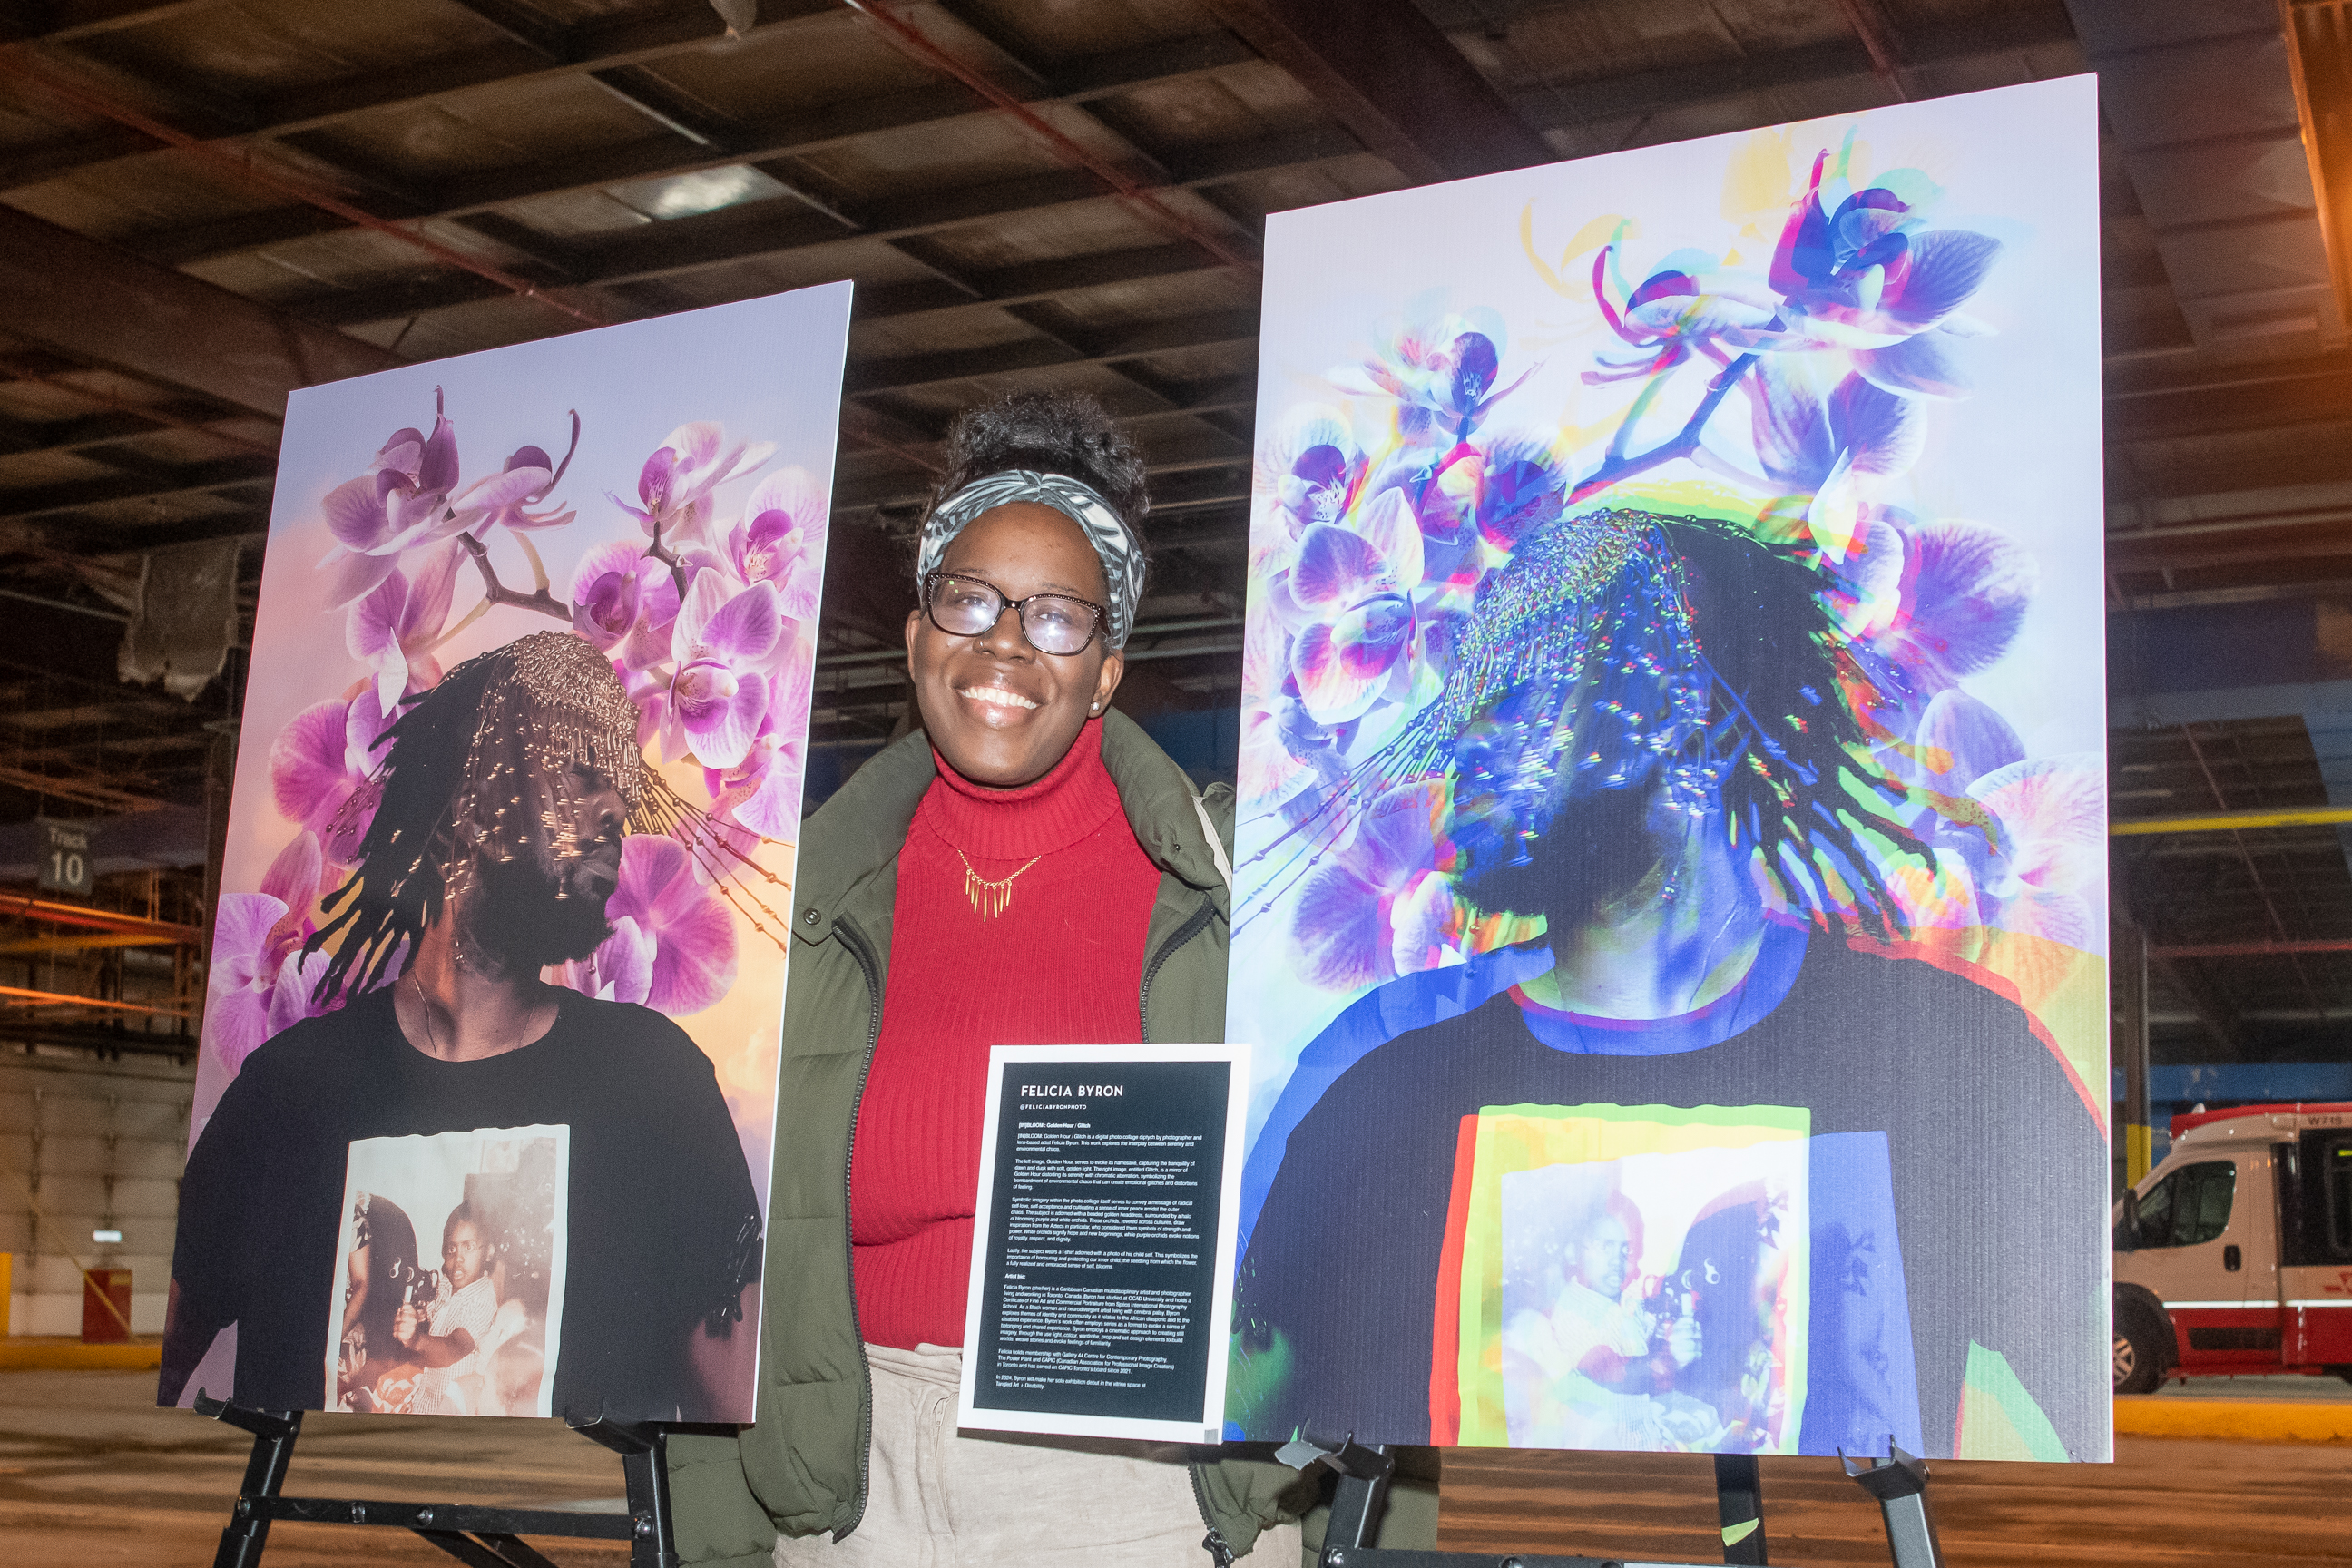 Photo of artist Felicia Byron at the Tangled Arts Launch Event